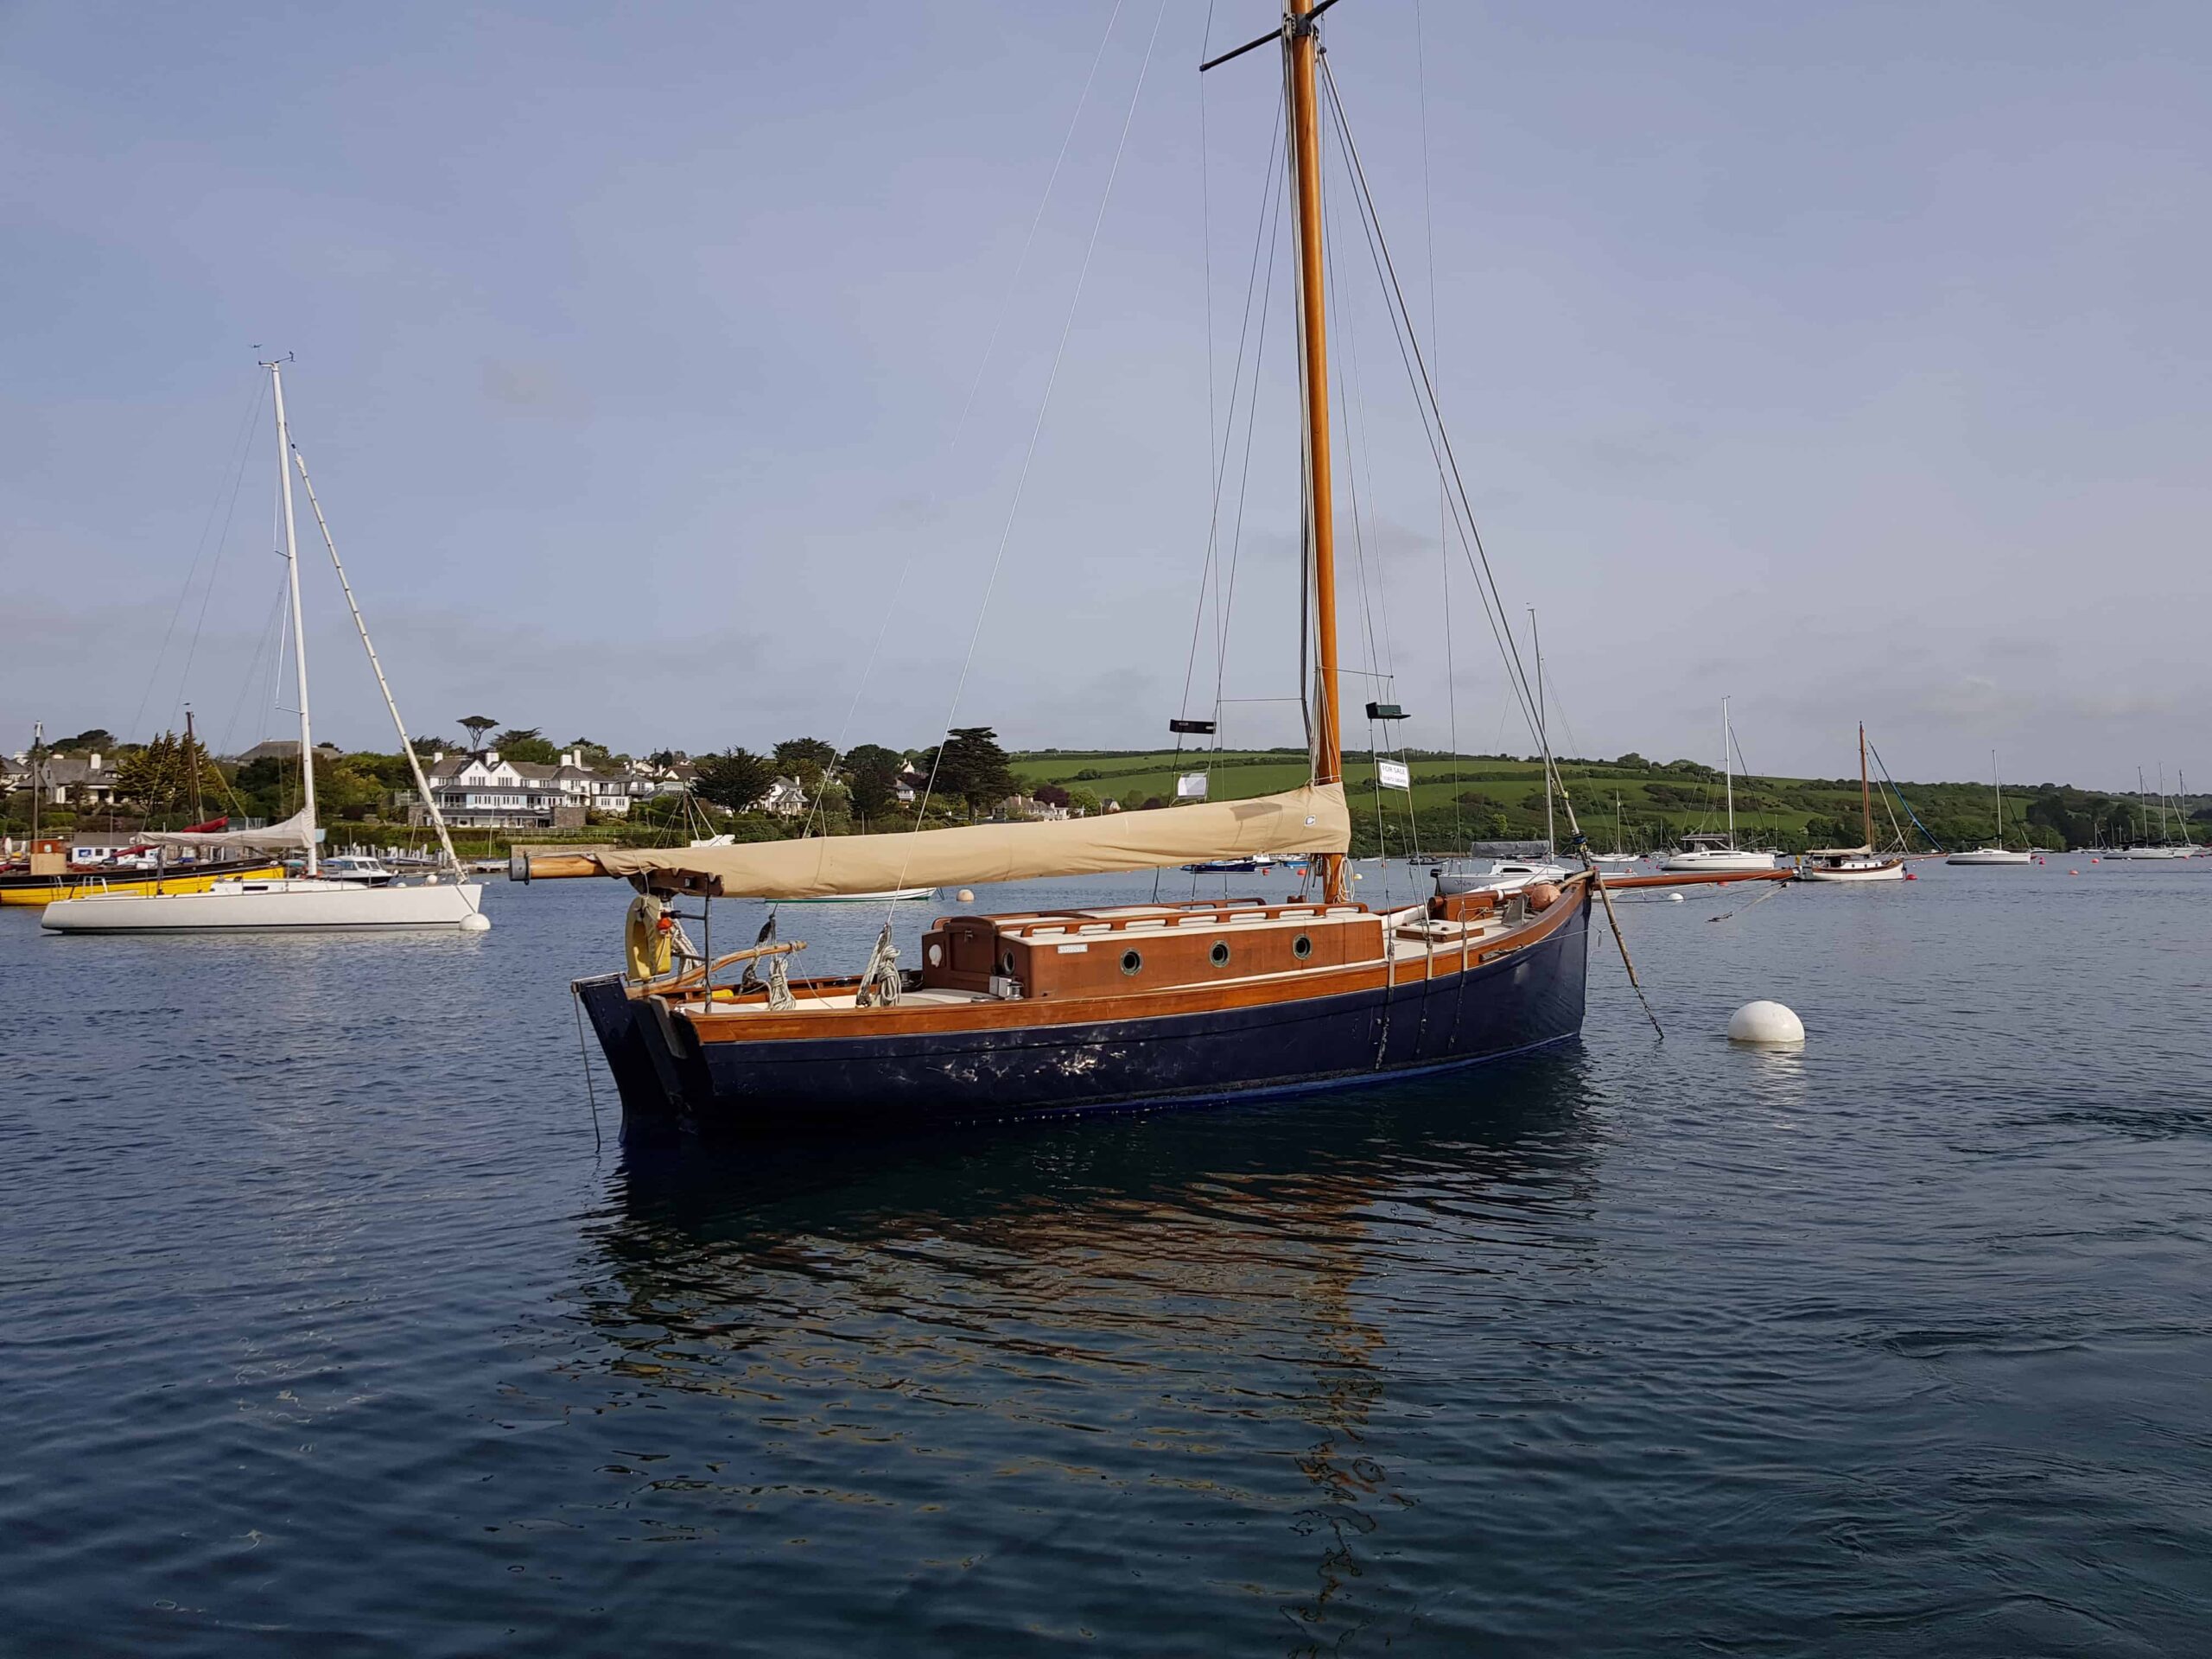 Heard 28 on her new mooring in Ireland after the yacht delivery from Penryn